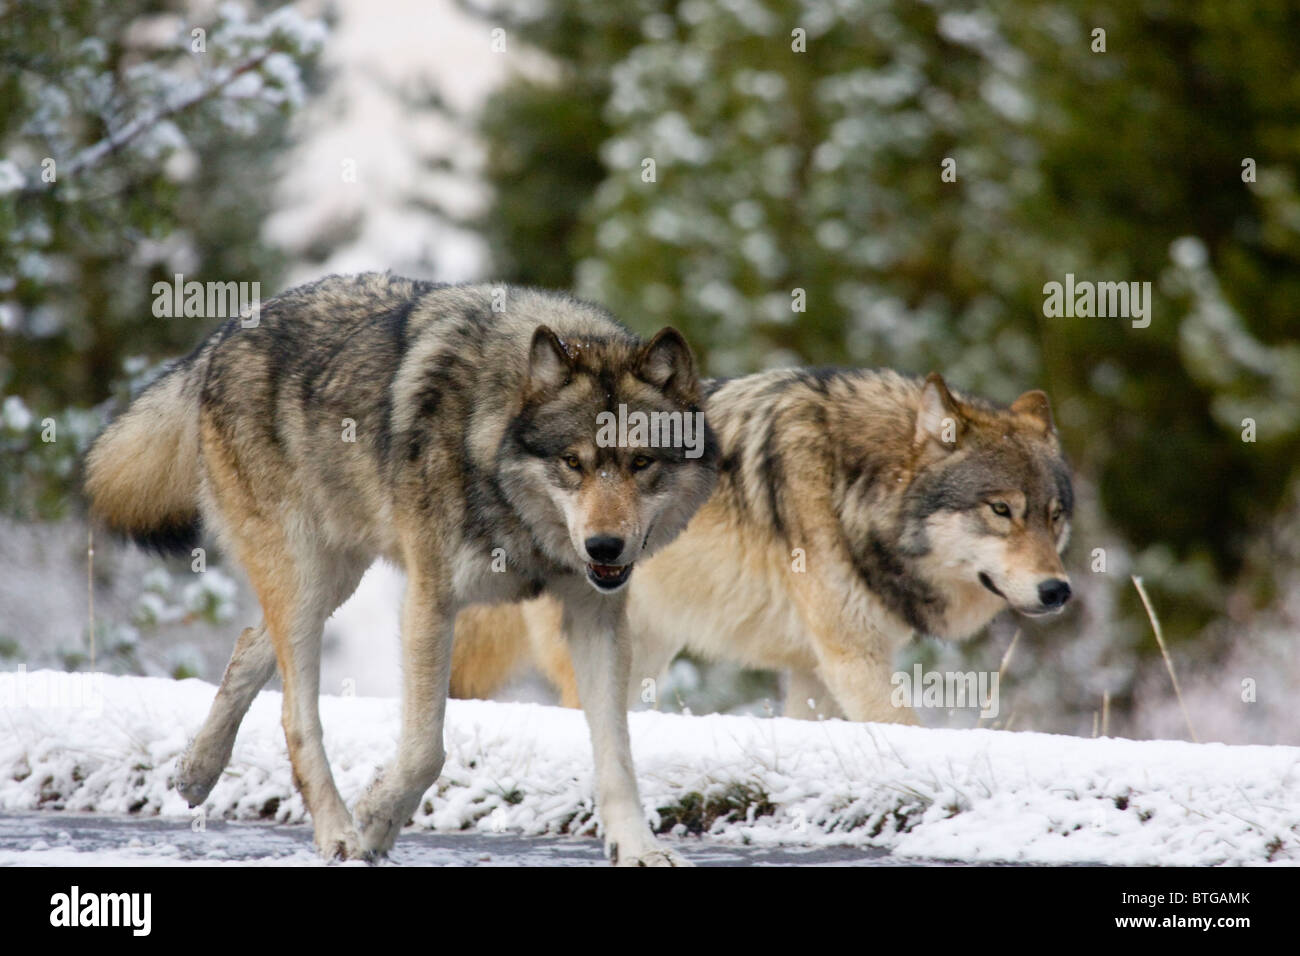 Wild gray  Wolves Running together-  truly wild (non-captive) wolf photo Stock Photo